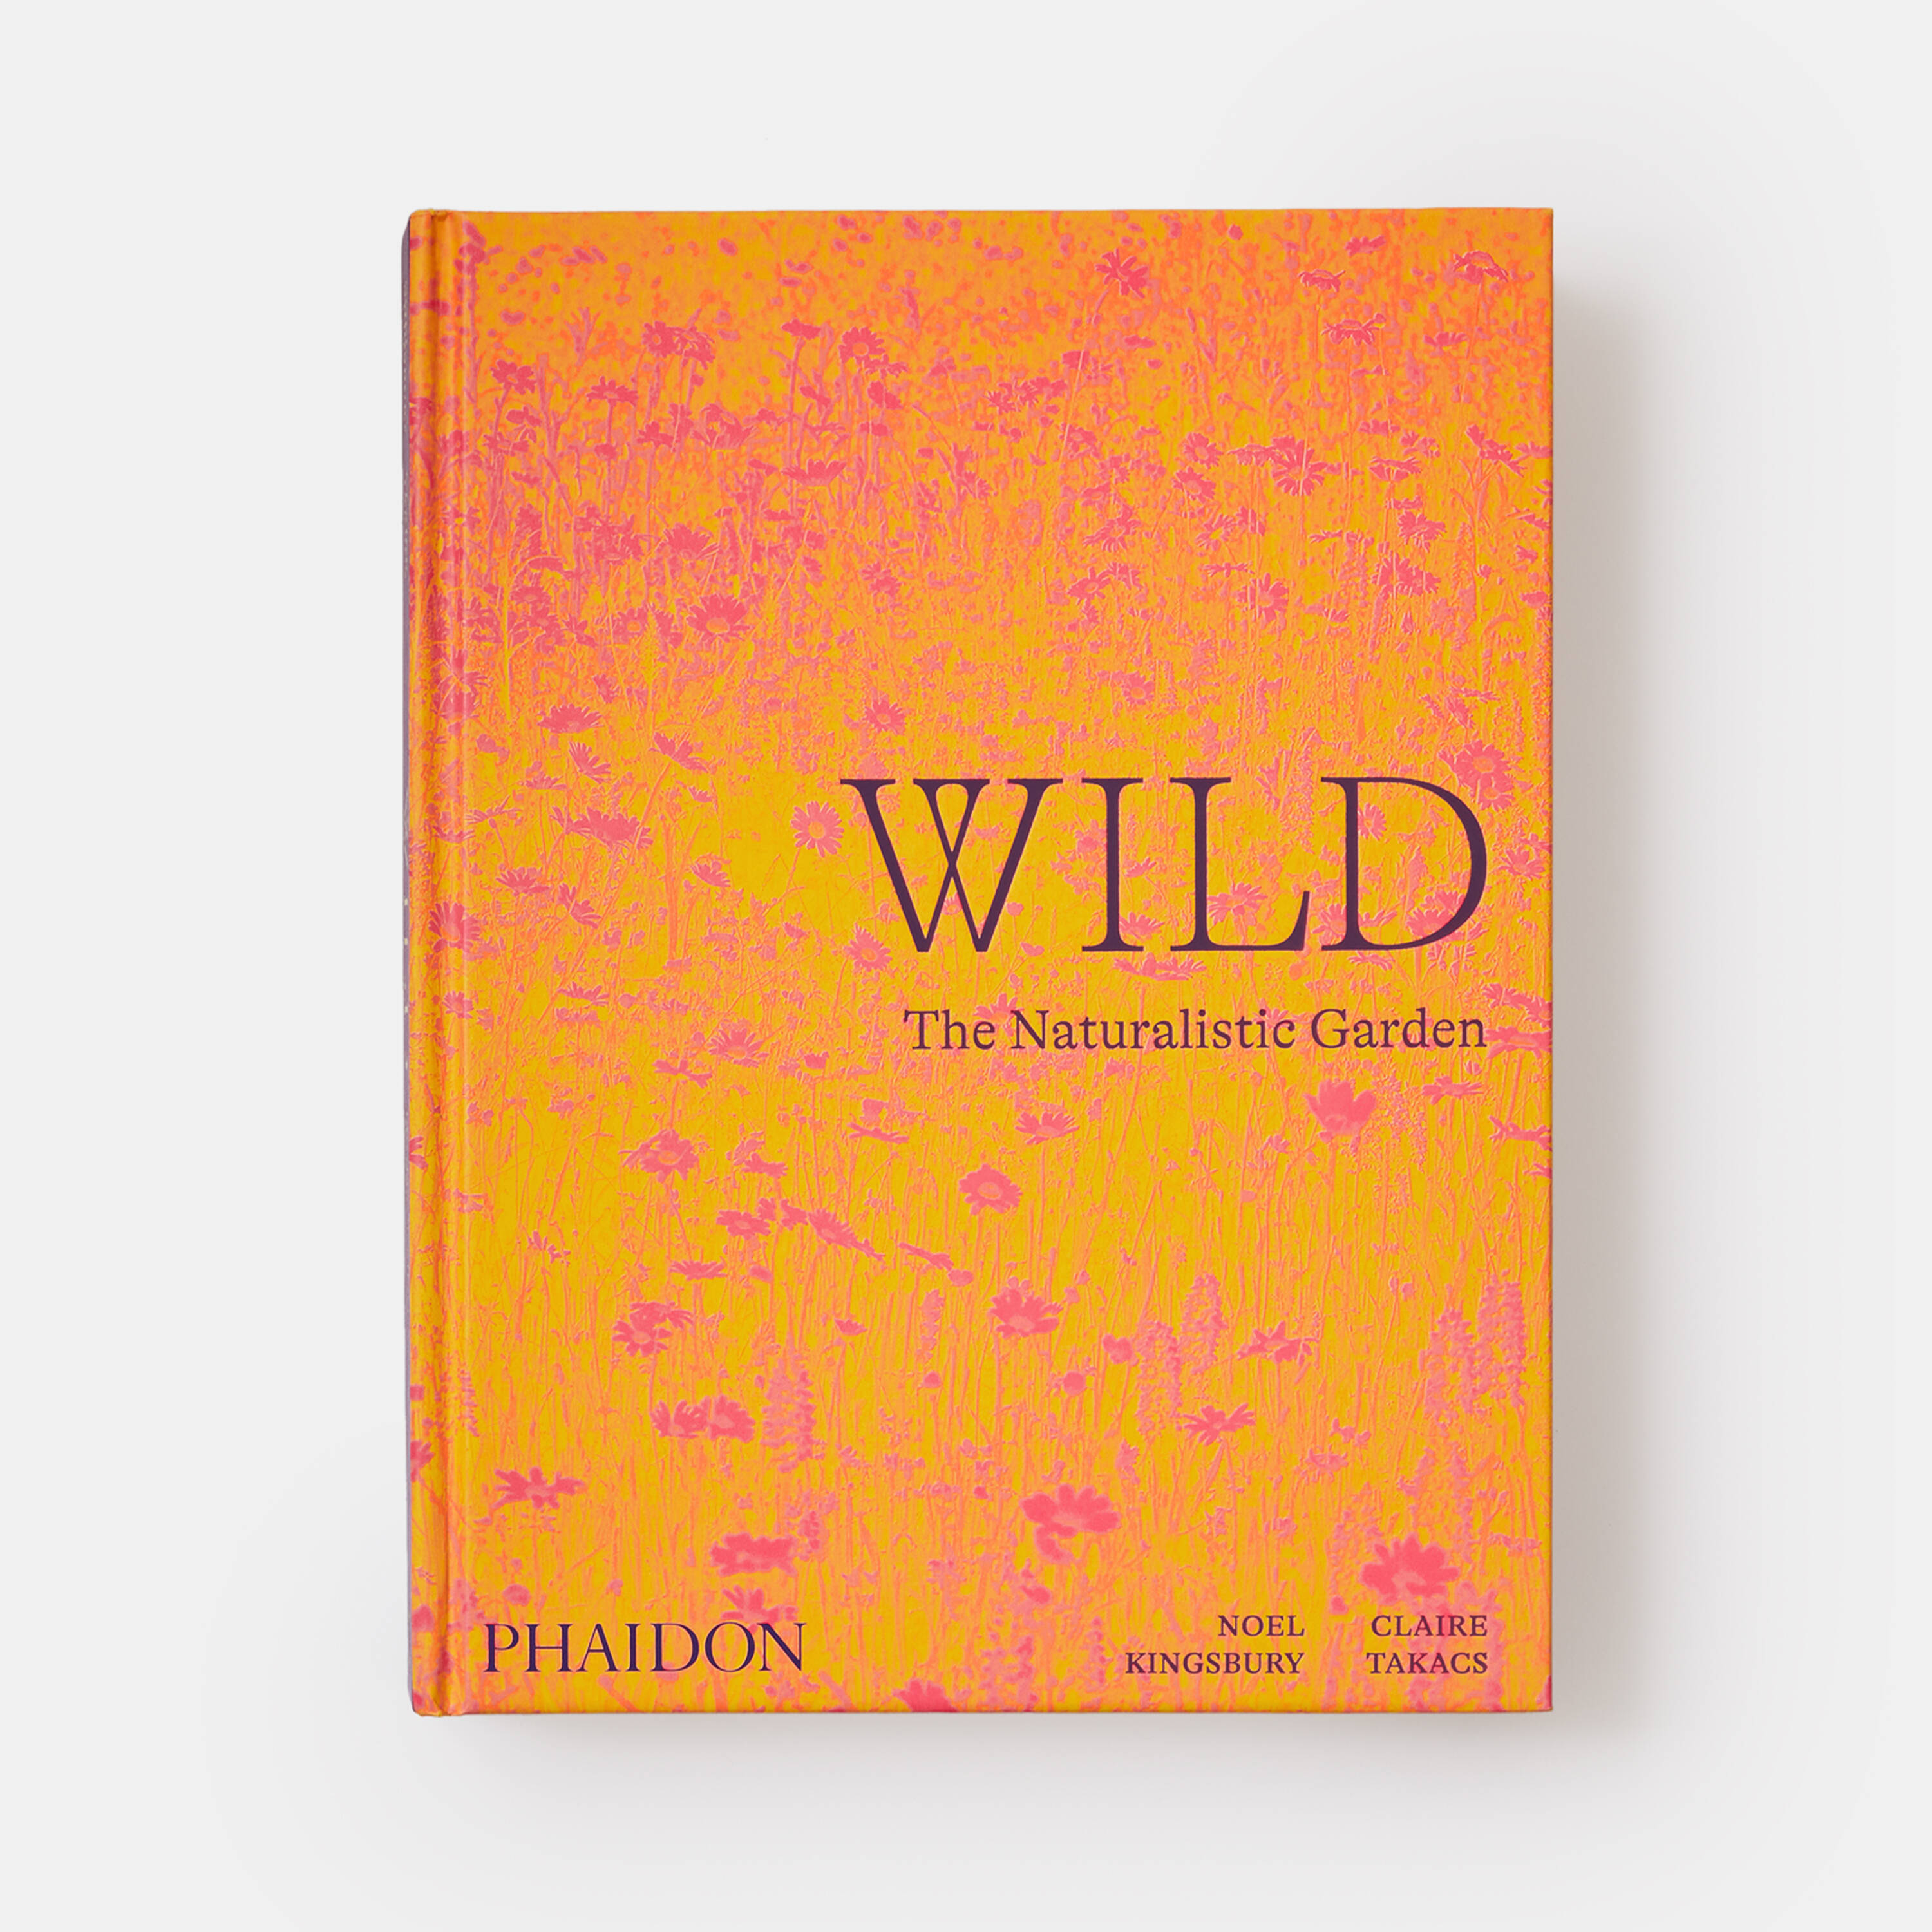 All you need to know about Wild: The Naturalistic Garden